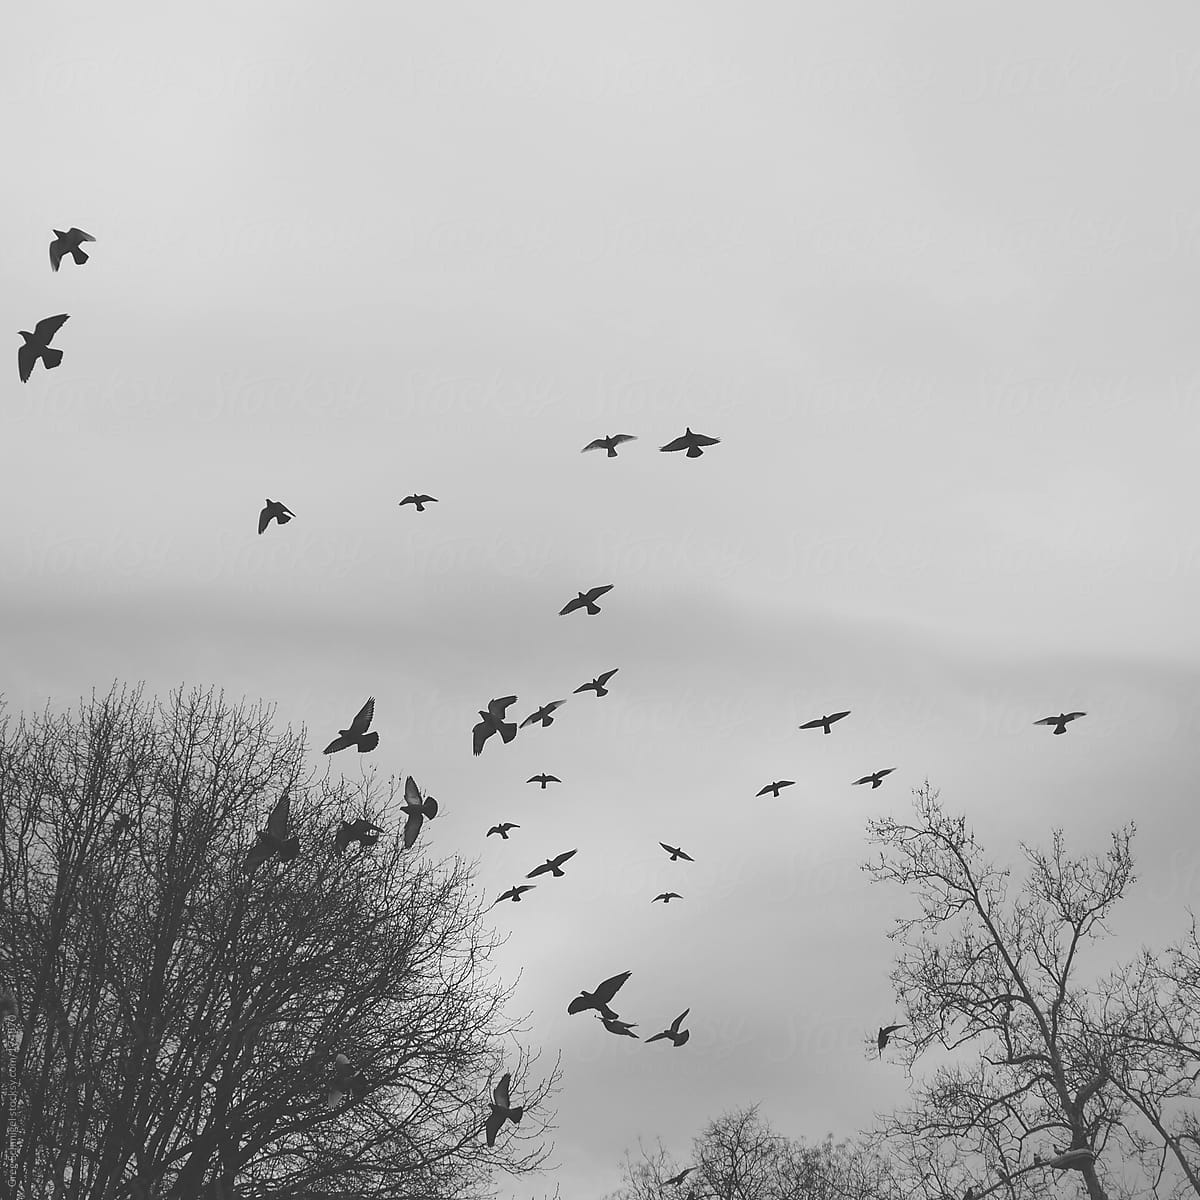 A black and white photograph of birds flying in a winter sky